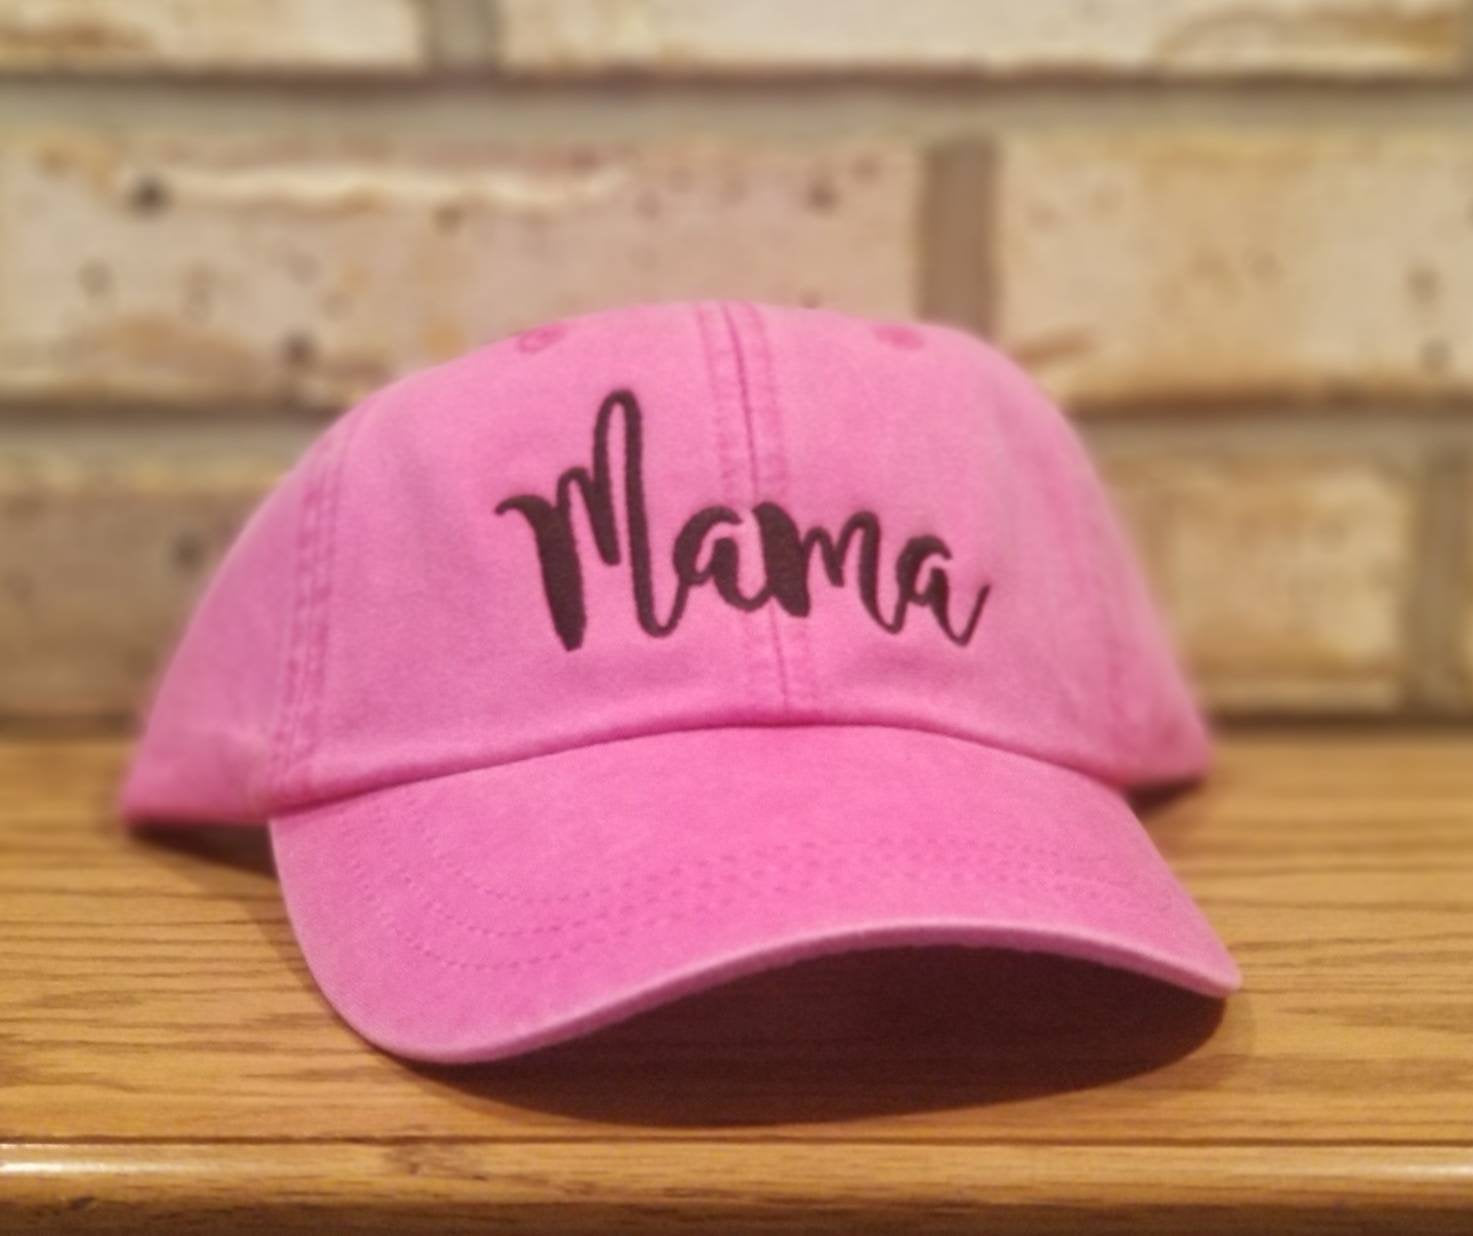 Mama Hat - Embroidered Mama, Mom, Mommy, Mother, Ma, Momma, Mothers Day, Birth Announcement, Custom Personalized Baseball or Trucker Hat